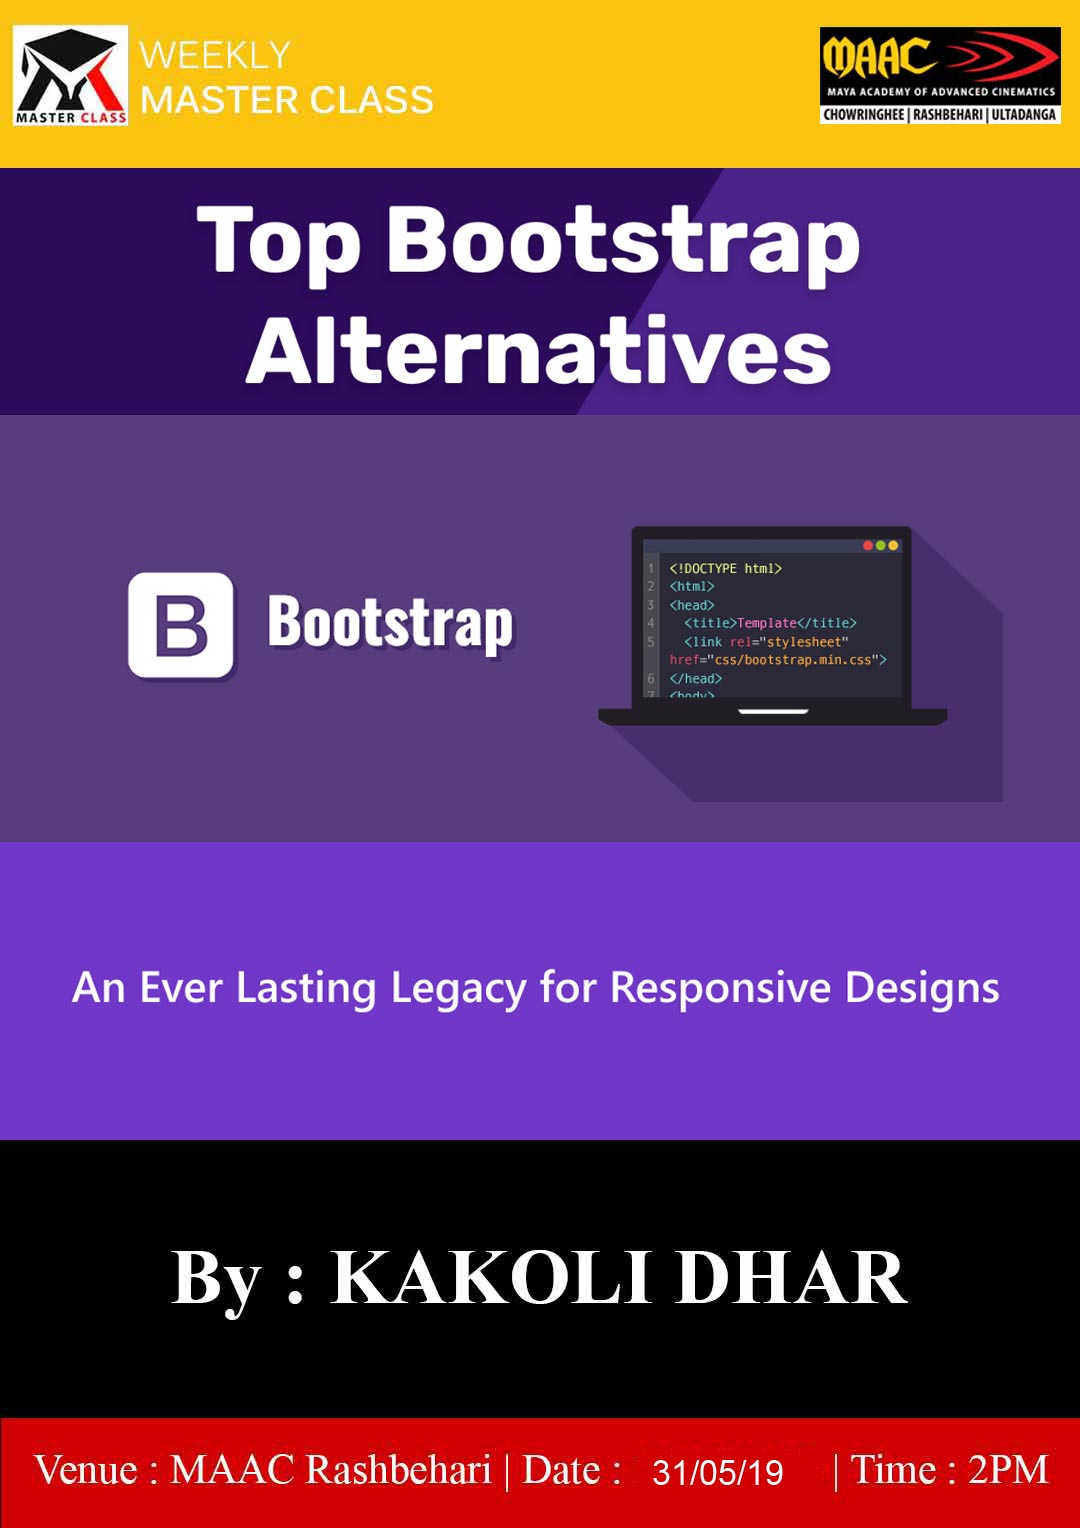 Weekly Master Class on Top Bootstrap Alternatives